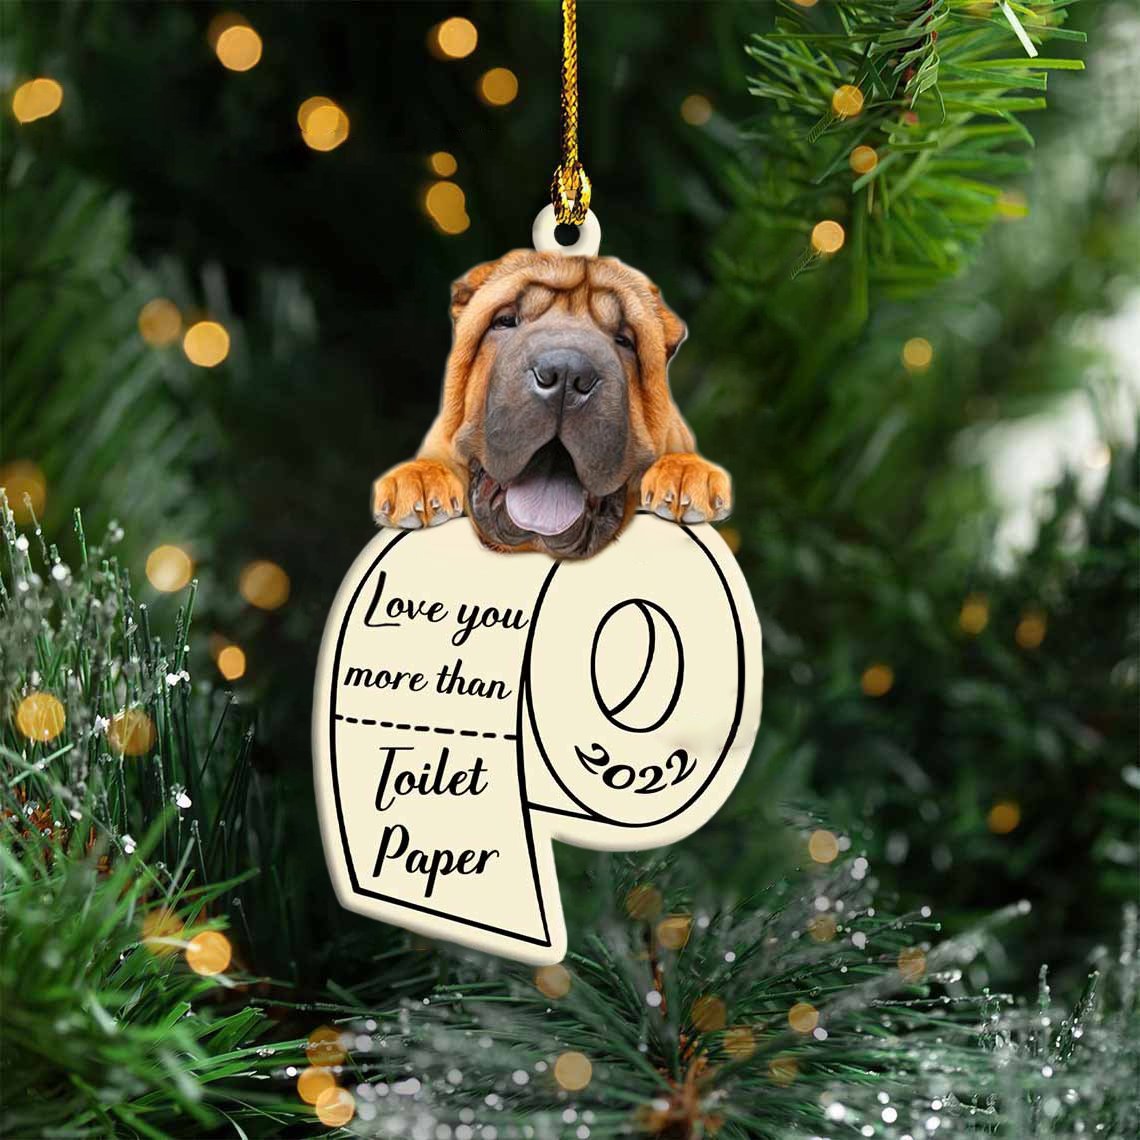 Shar Pei Love You More Than Toilet Paper 2022 Hanging Ornament